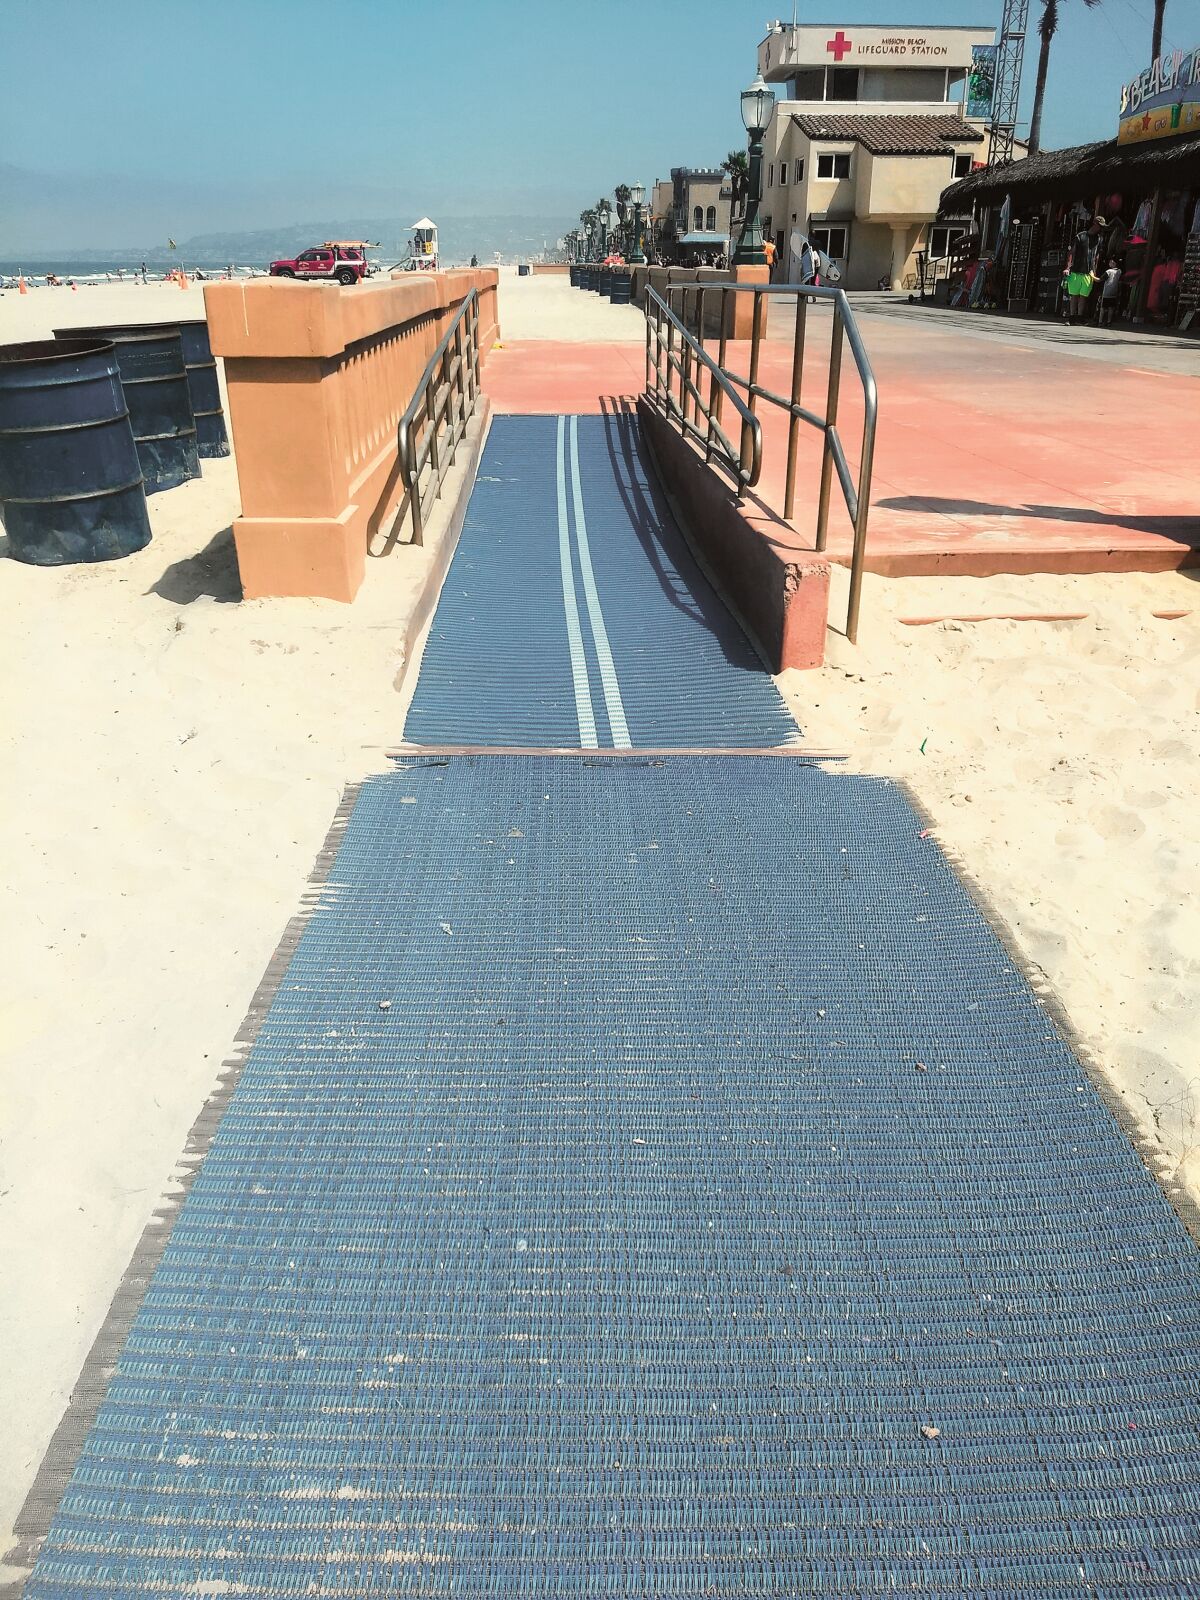 A proposed new ADA-access ramp on the north end of Kellogg Park in La Jolla Shores would resemble this one at Mission Beach.